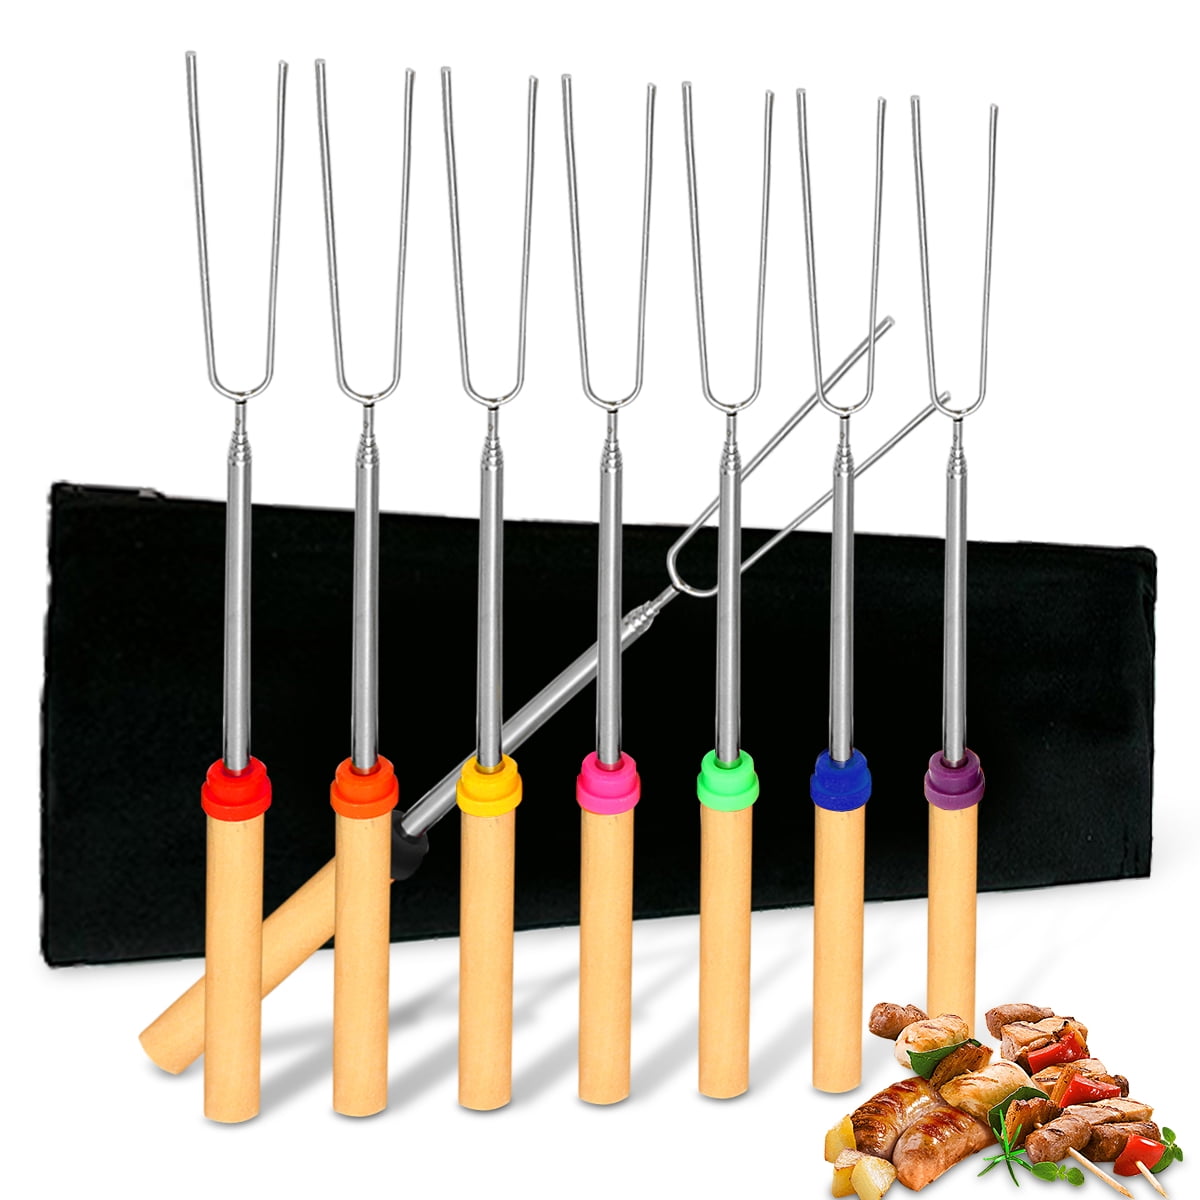 Details about   Set Of 5 Camping Hiking Cookware Extendable Rotating Marshmallow Roasting Sticks 